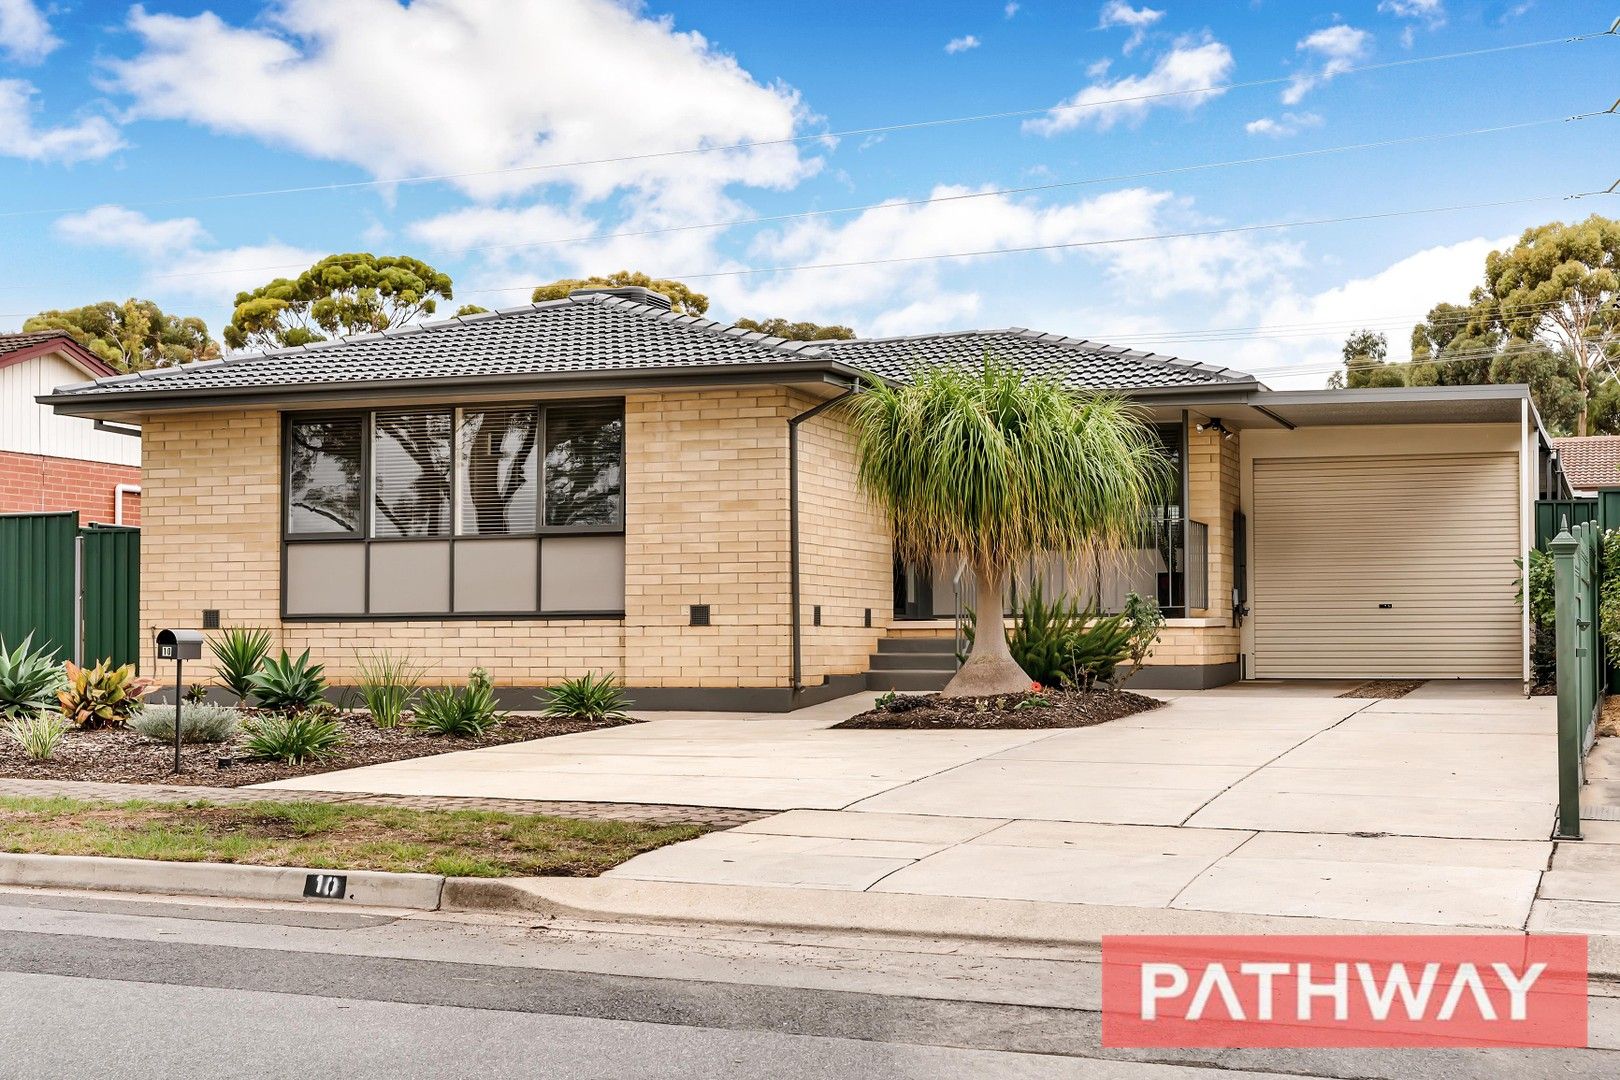 3 bedrooms House in 10 Mostyn Crescent SALISBURY EAST SA, 5109